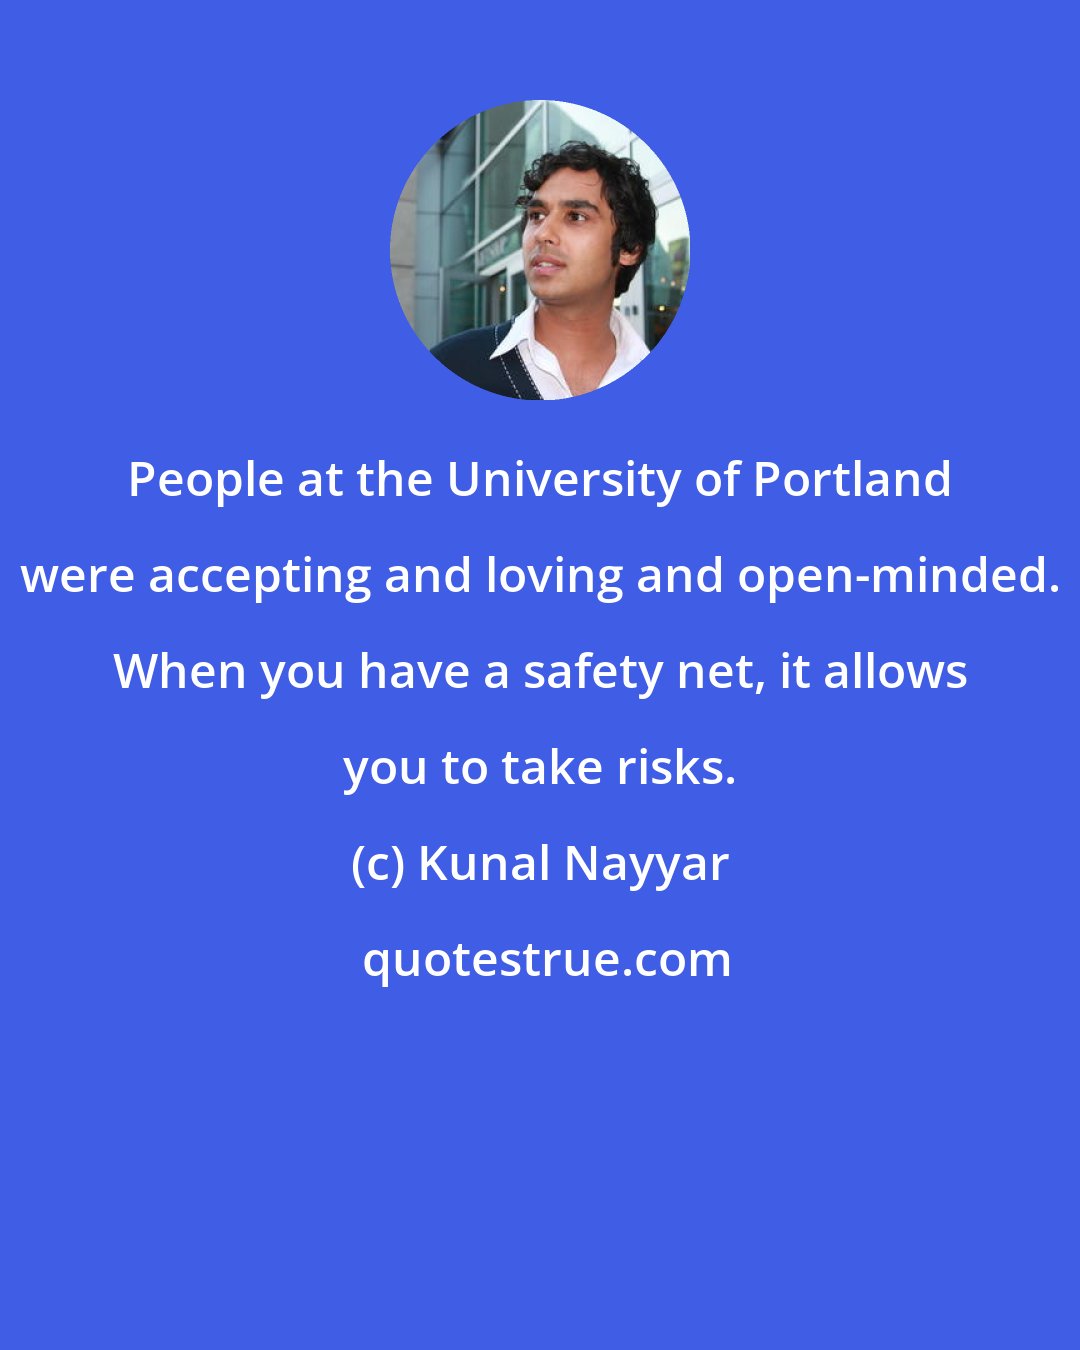 Kunal Nayyar: People at the University of Portland were accepting and loving and open-minded. When you have a safety net, it allows you to take risks.